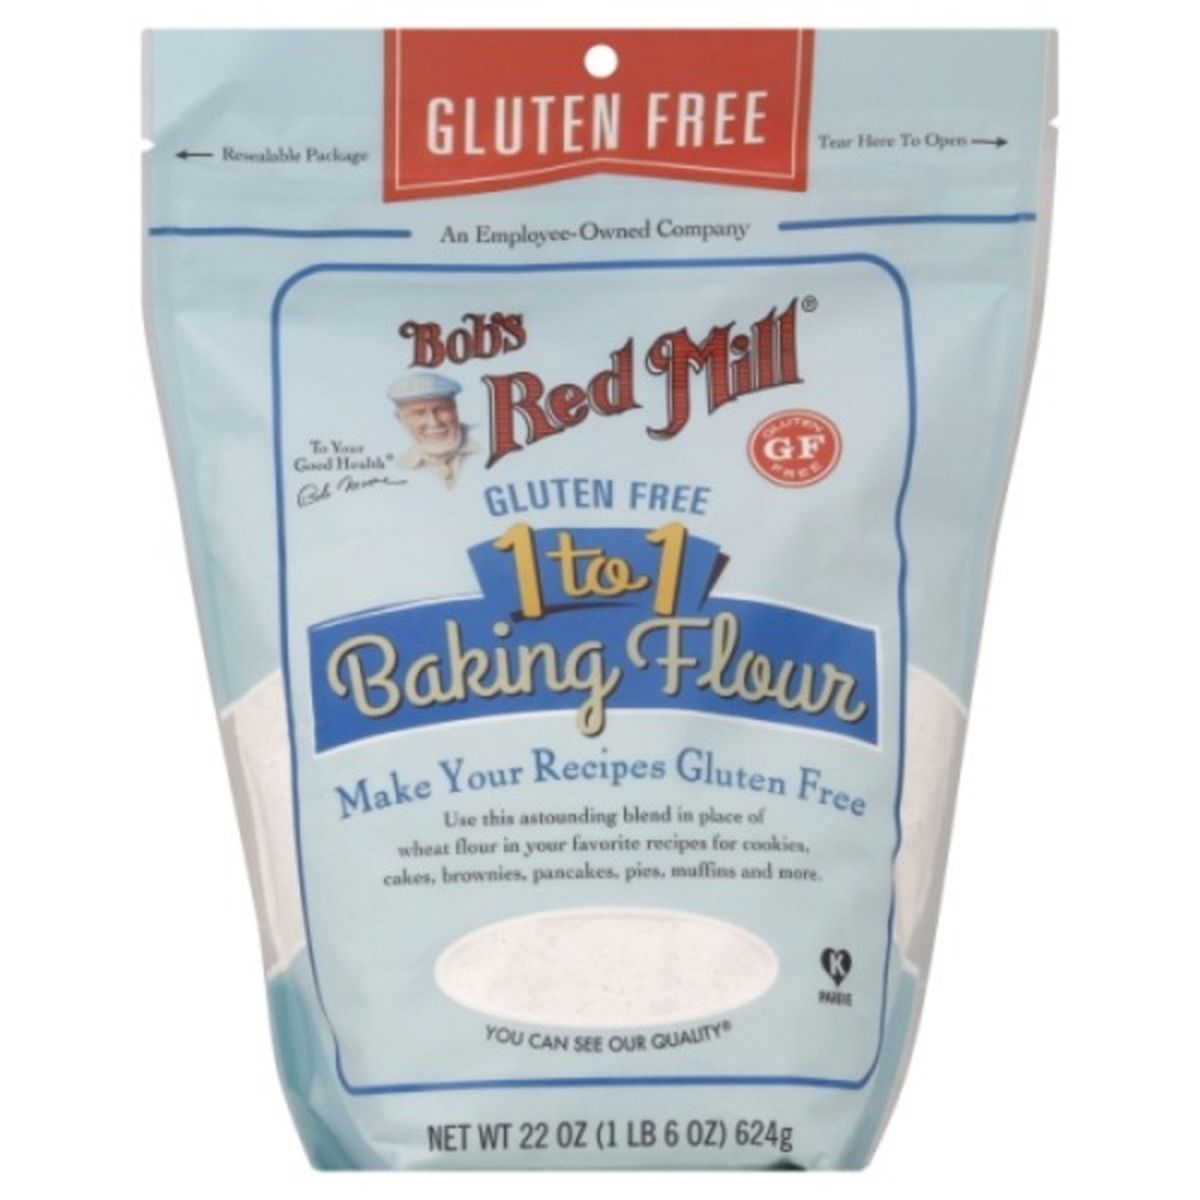 Calories in Bob's Red Mill Baking Flour, 1 to 1